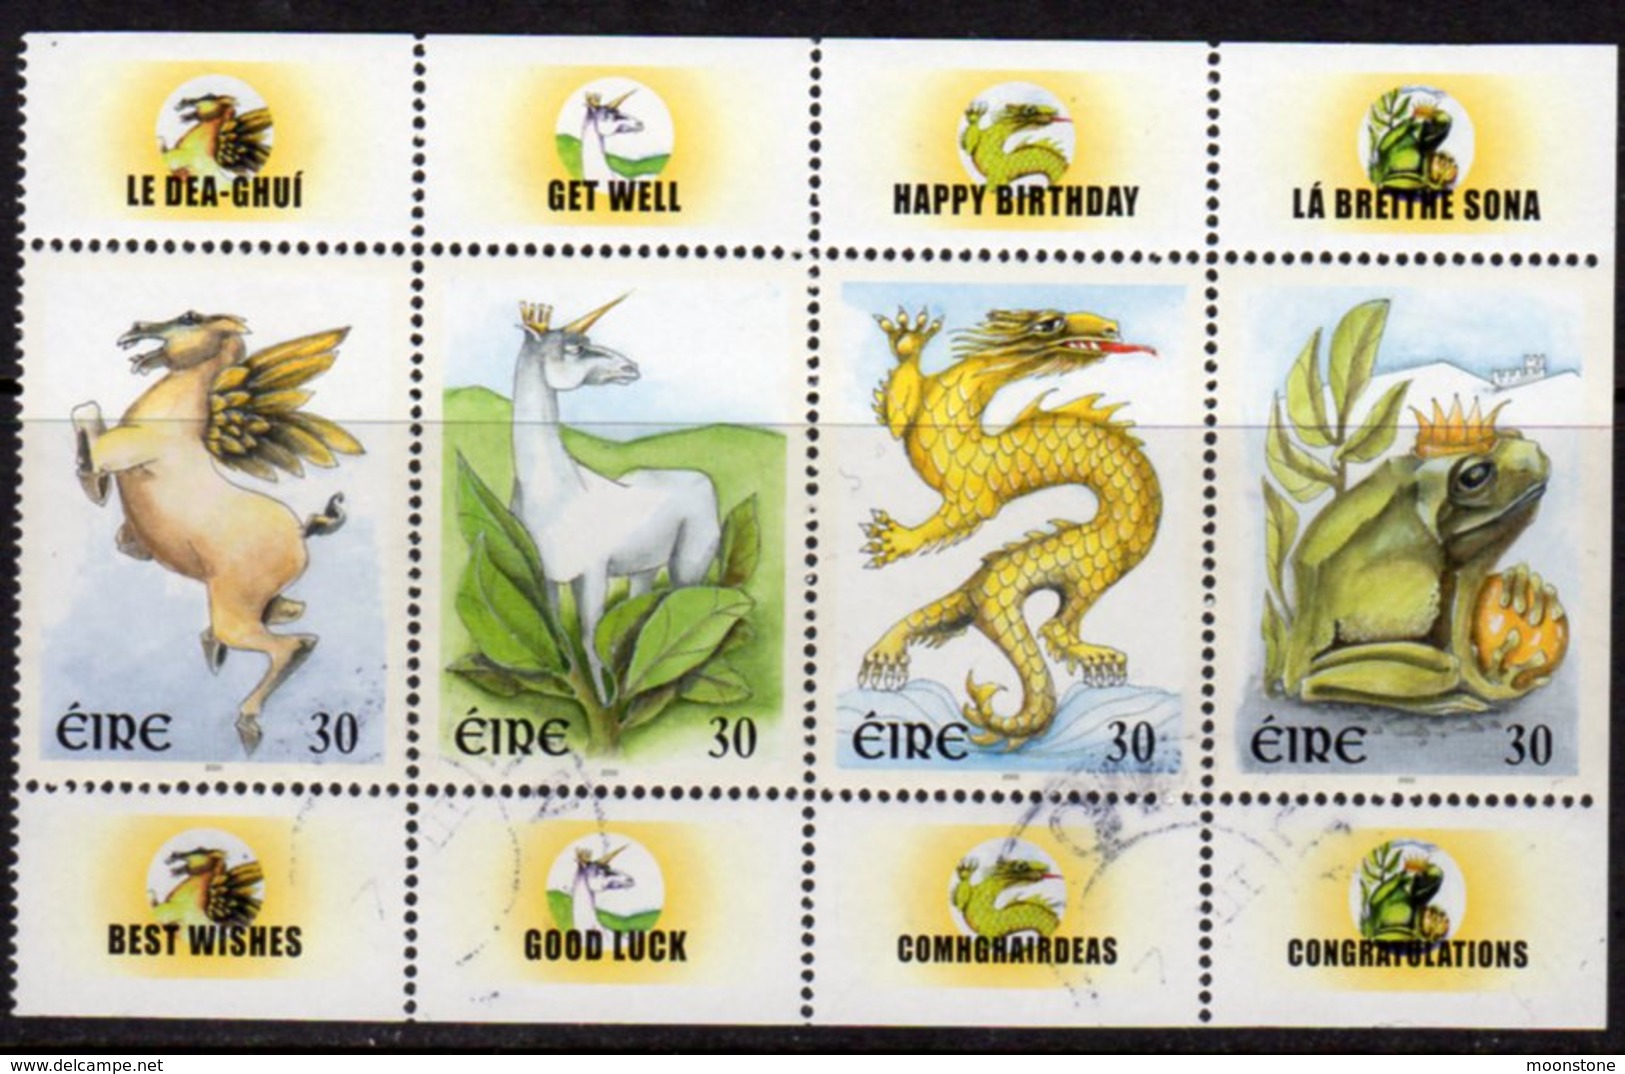 Ireland 2000 Greetings Booklet Pane, Used, SG 1295/8 - Oblitérés